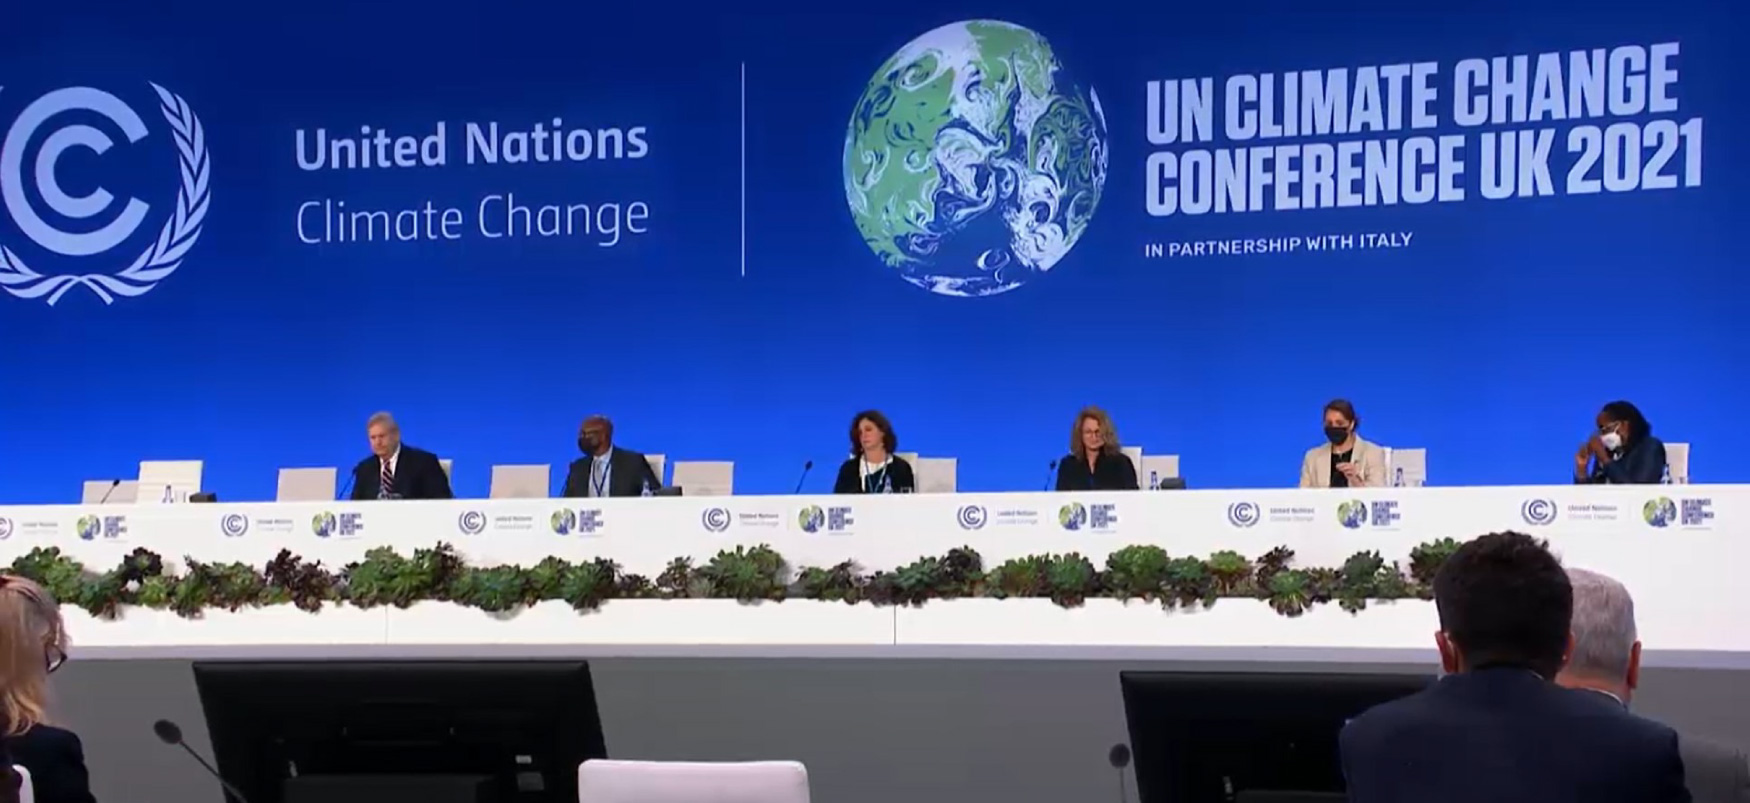 Six people sit on a dais behind a long white desk. On the wall behind them are the words “United Nations Climate Change” and “U N Climate Change Conference U K 2021 in partnership with Italy.” A drawing of the Earth is also on the wall.